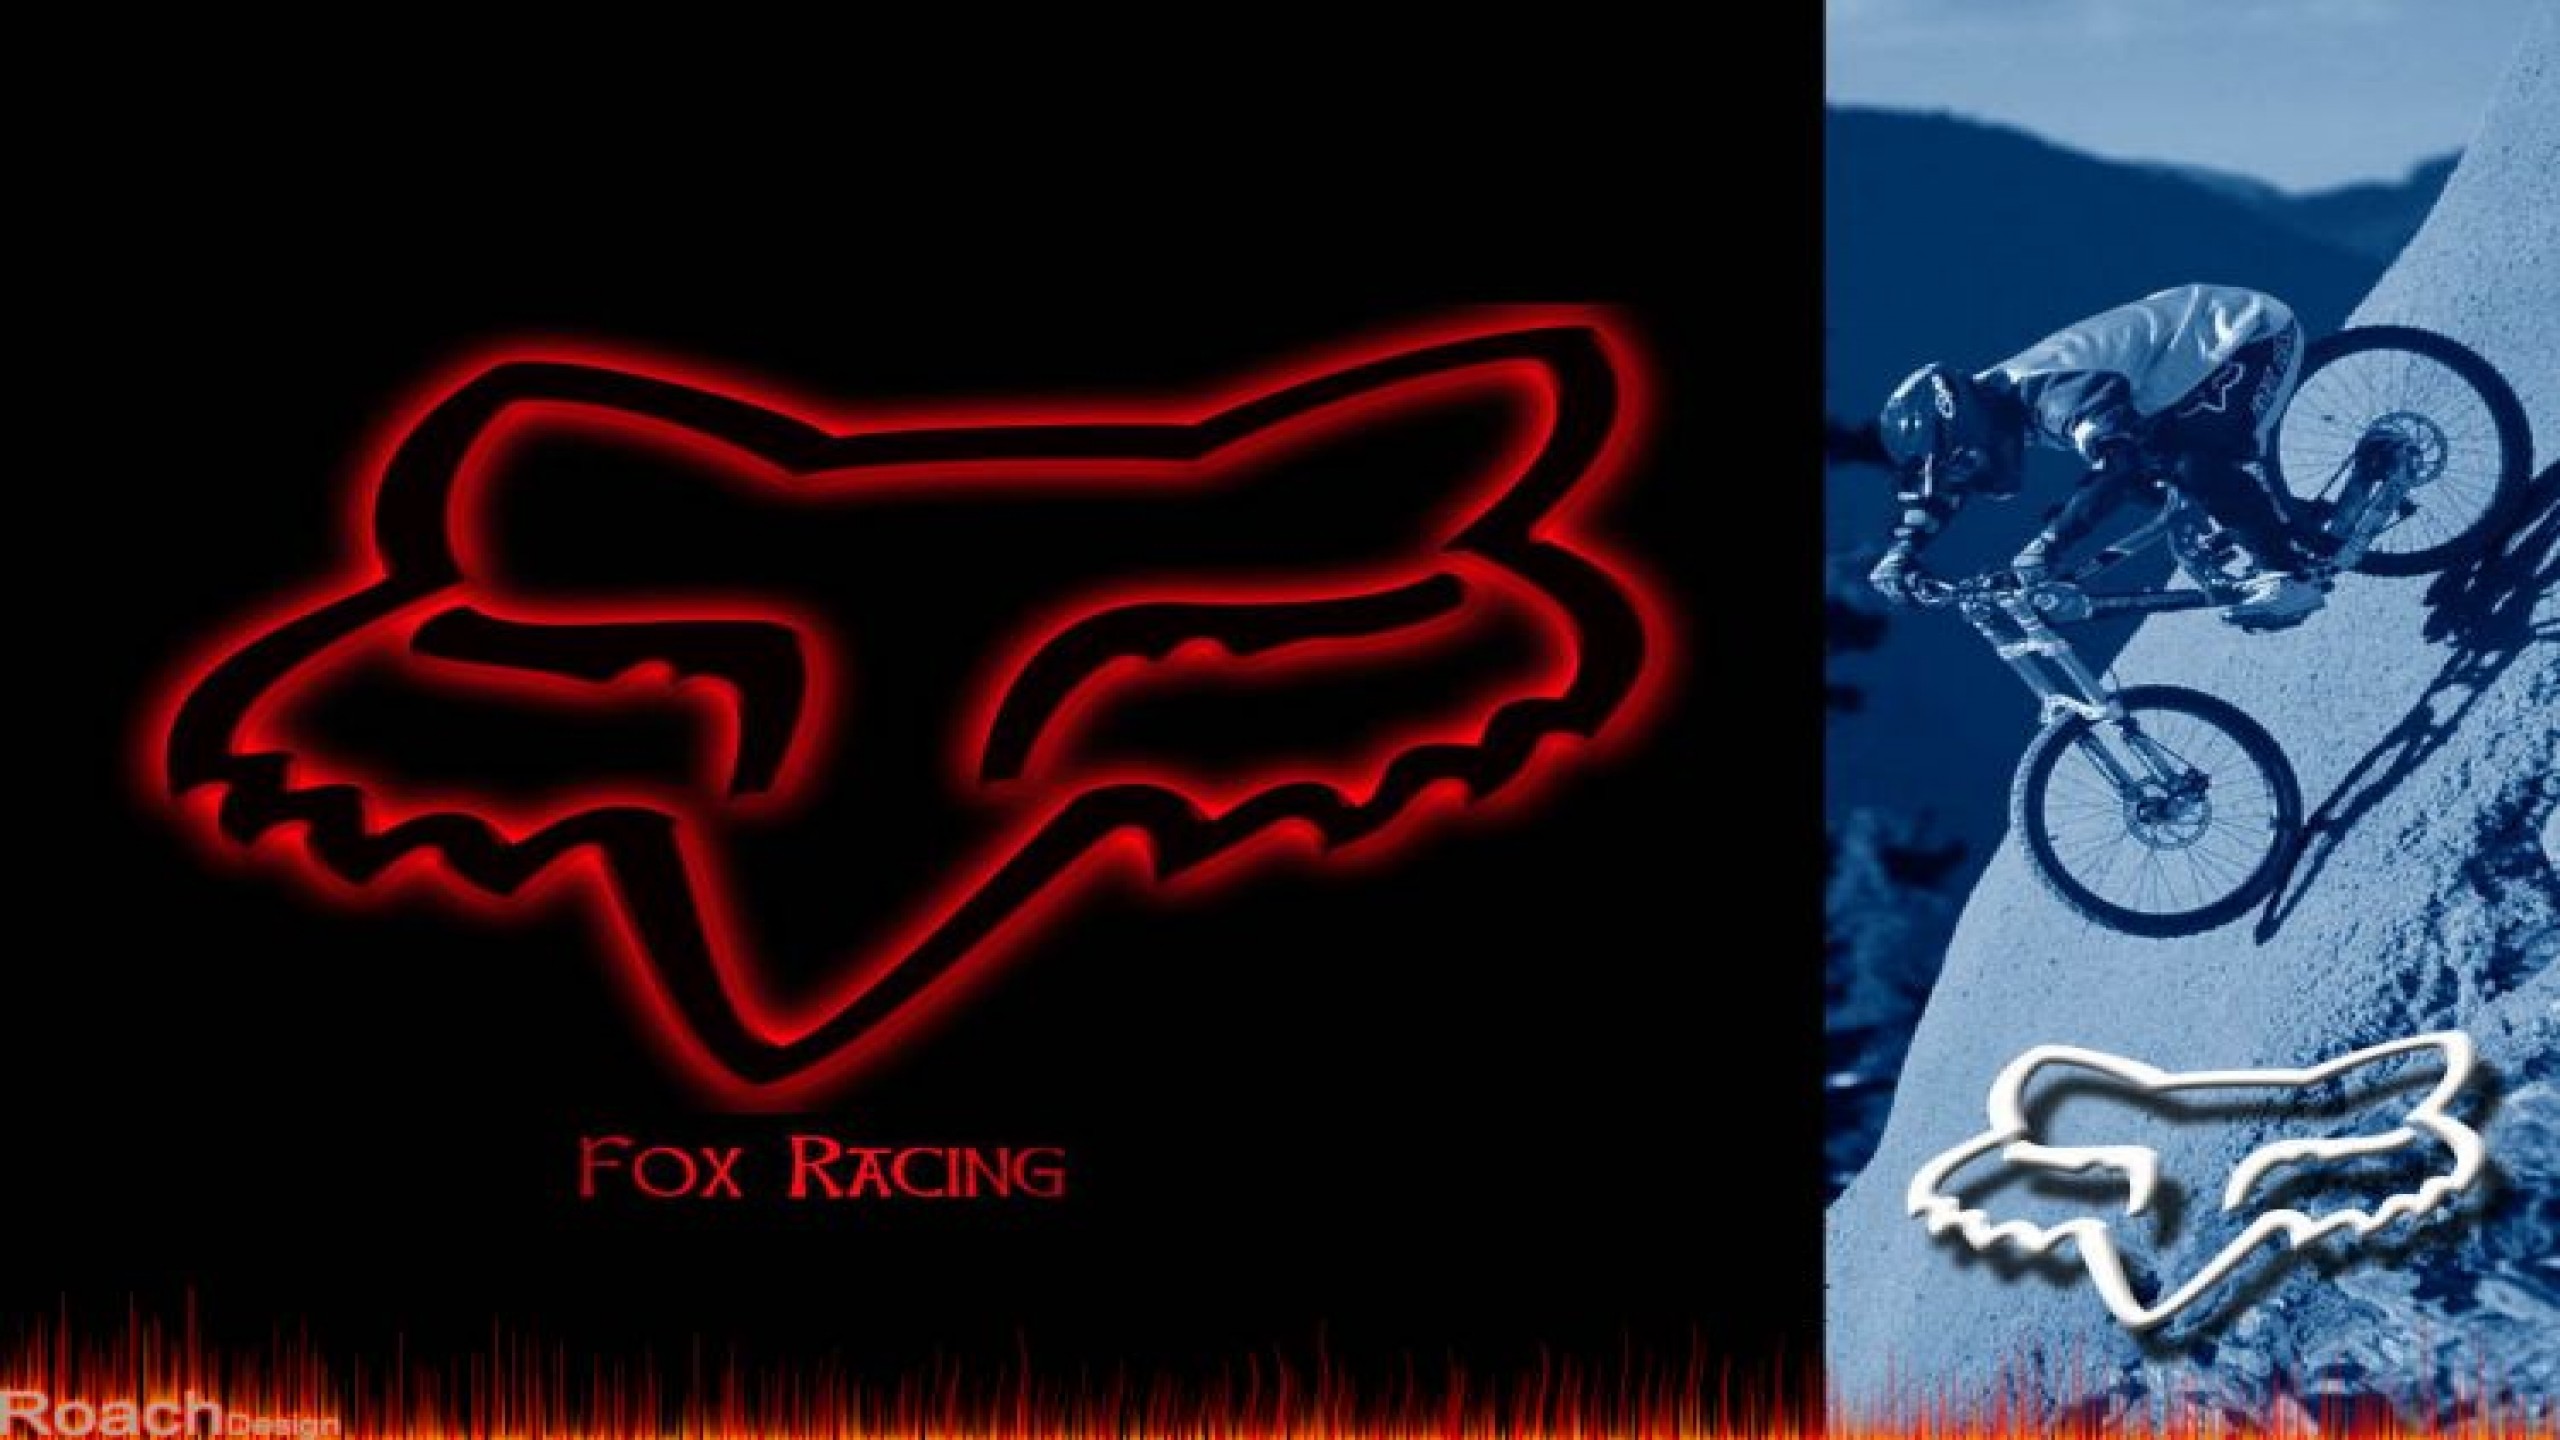 2560x1440 free image fox racing amazing free download wallpapers hi res quality  images computer wallpapers cool best 2560Ã1440 Wallpaper HD